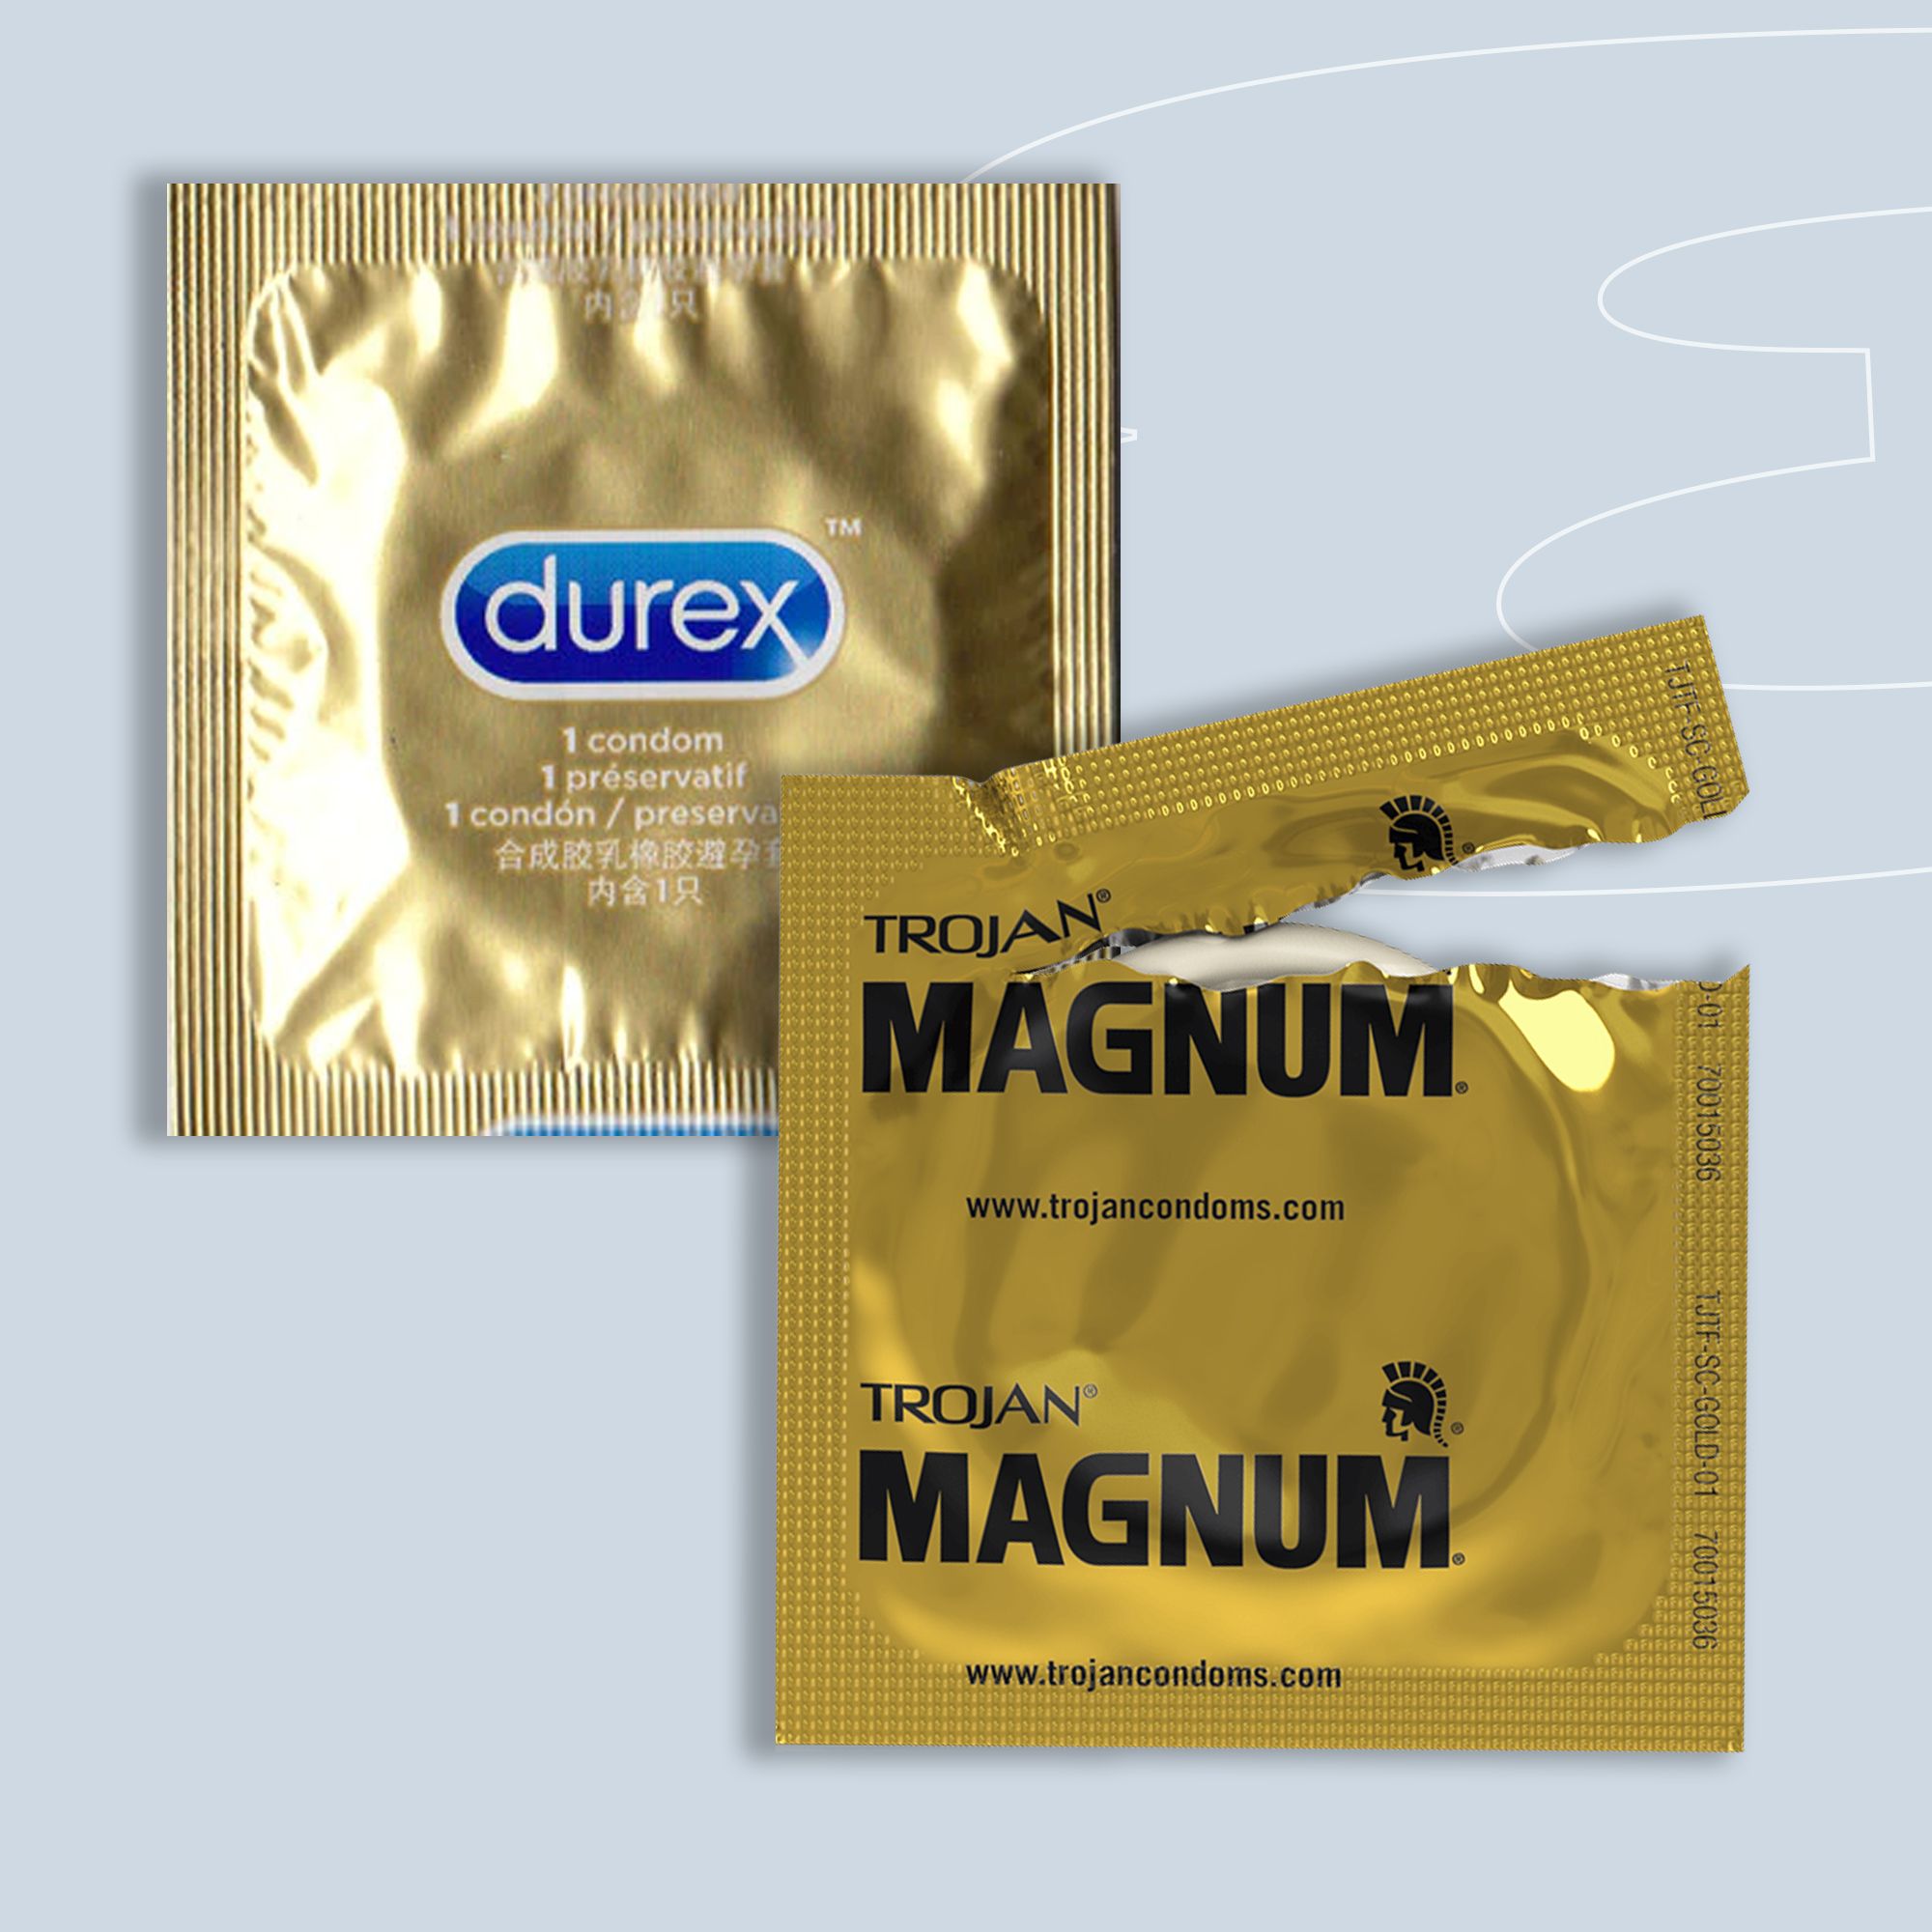 largest condom on the market